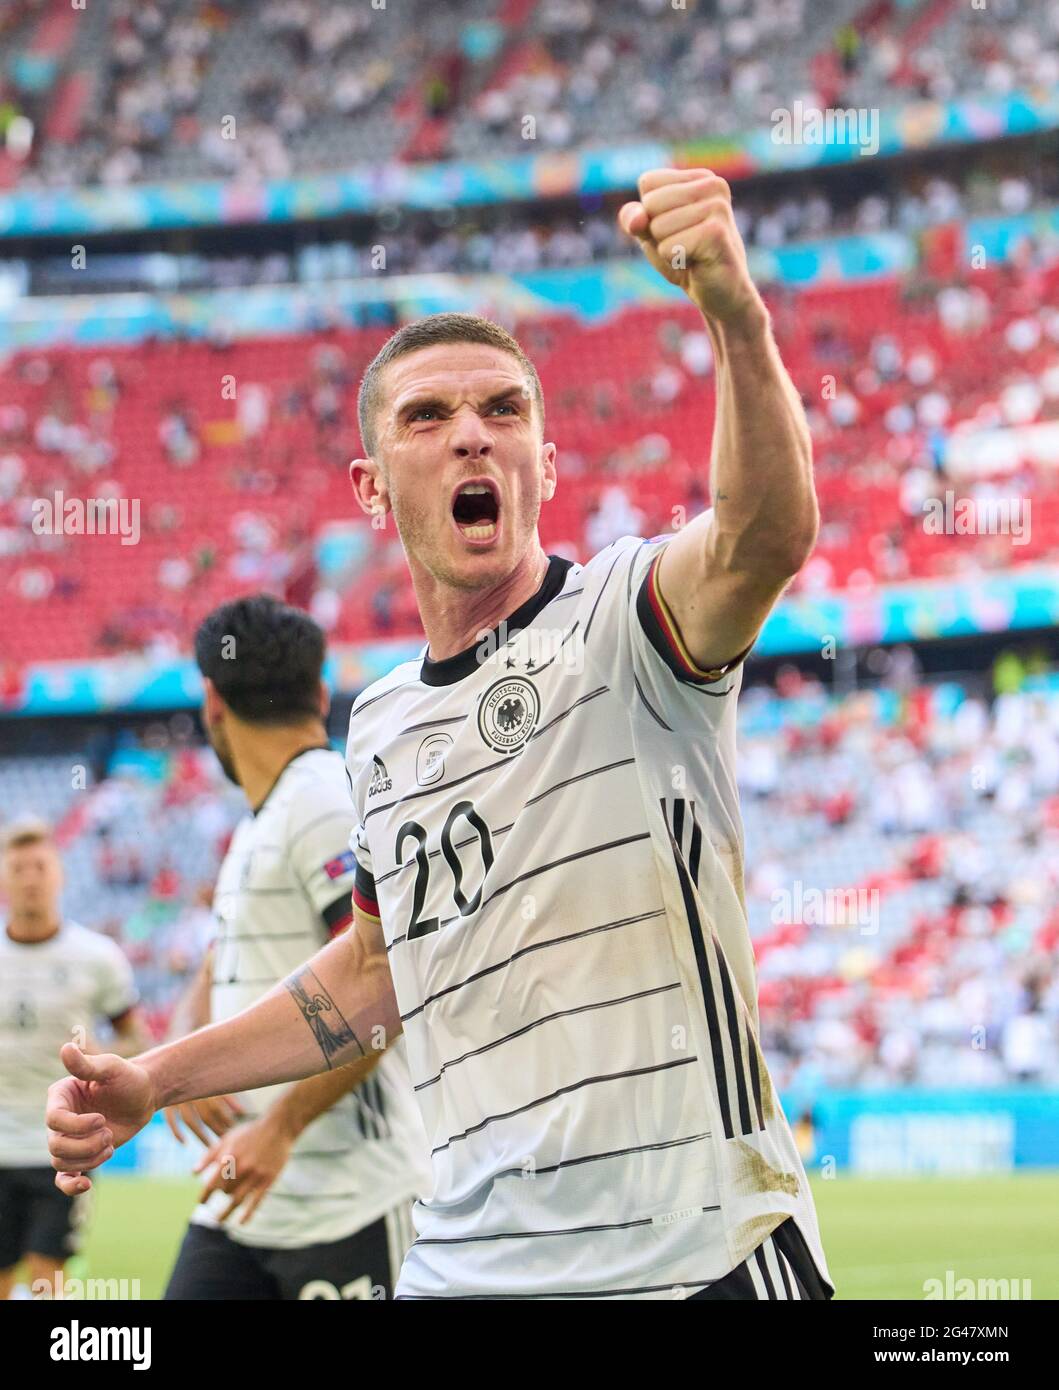 Robin Gosens, DFB 20  jubel when  Serge Gnabry, DFB 10   scores, shoots goal , Tor, Treffer,,, 1-2 jubel, celebrates his goal, happy, laugh, celebration,  in the Group F match PORTUGAL - GERMANY  at the football UEFA European Championships 2020 in Season 2020/2021 on June 19, 2021  in Munich, Germany. © Peter Schatz / Alamy Live News Stock Photo